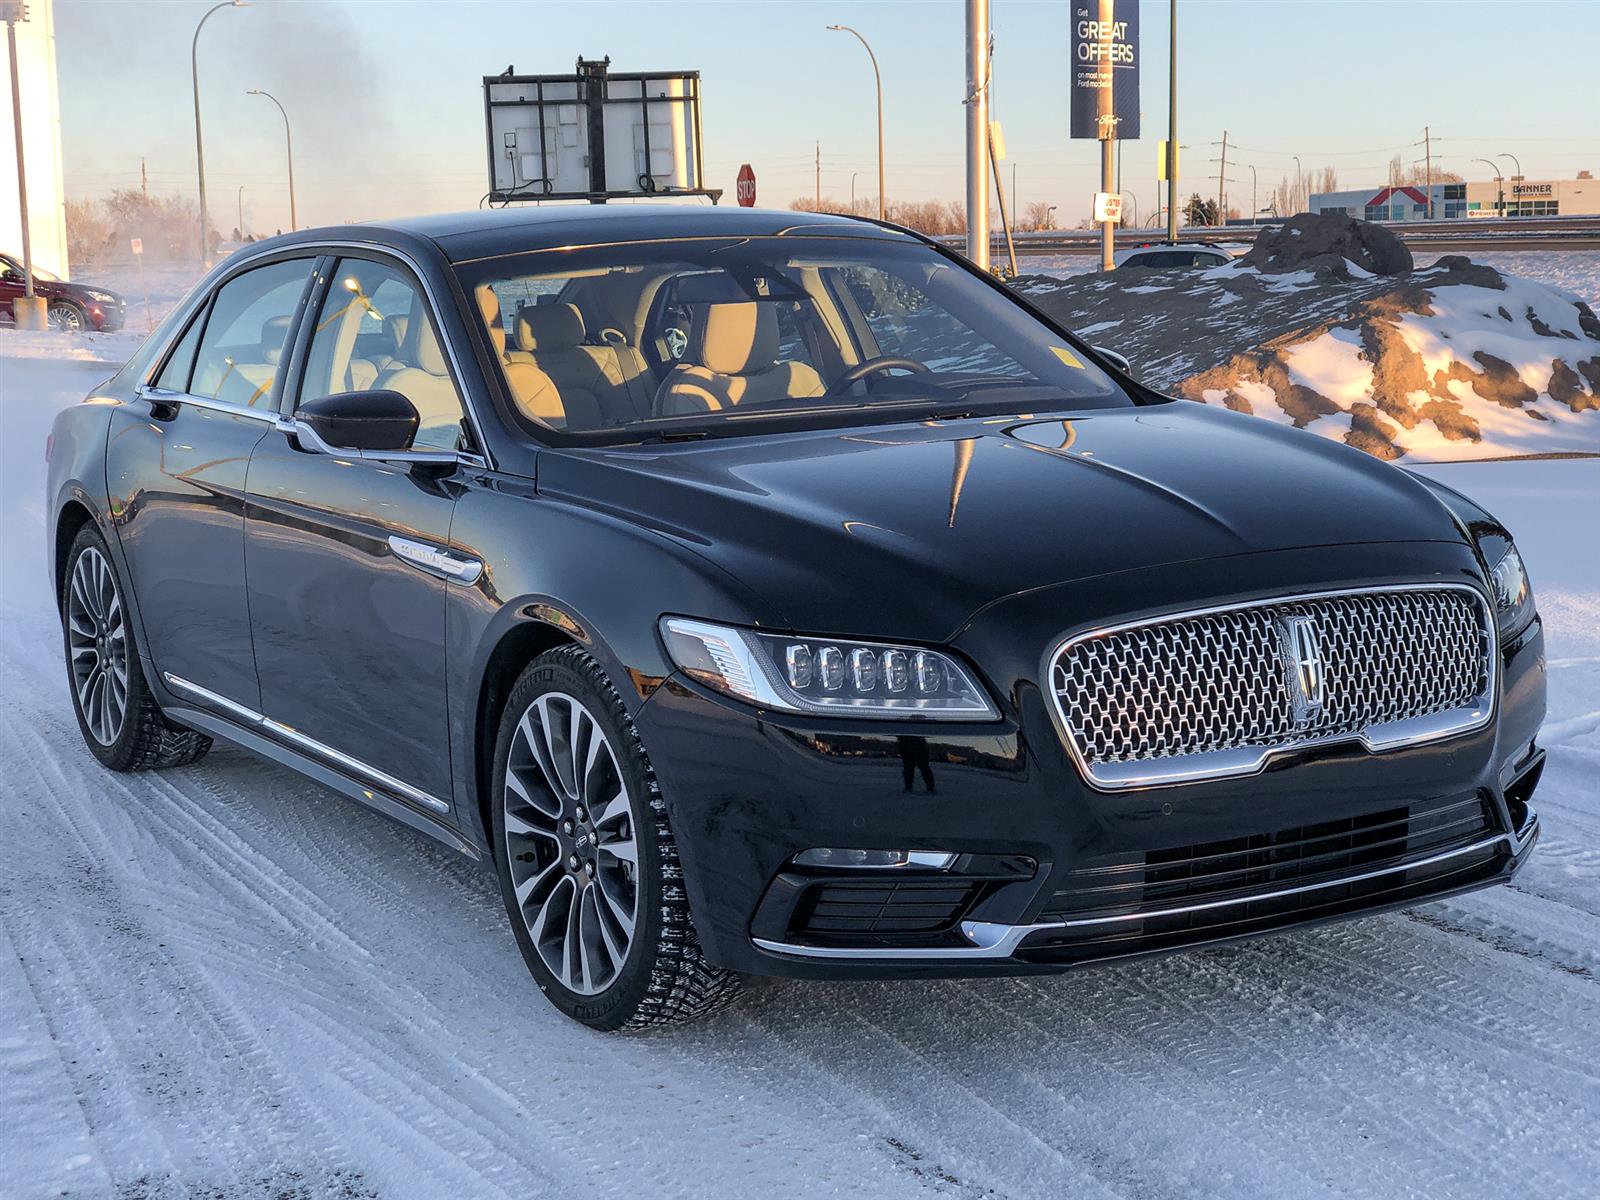 2020 Lincoln Continental RESERVE | 3.0L TURBO V6 | AWD | 360-DEGREE CAMERA | FULLY-LOADED